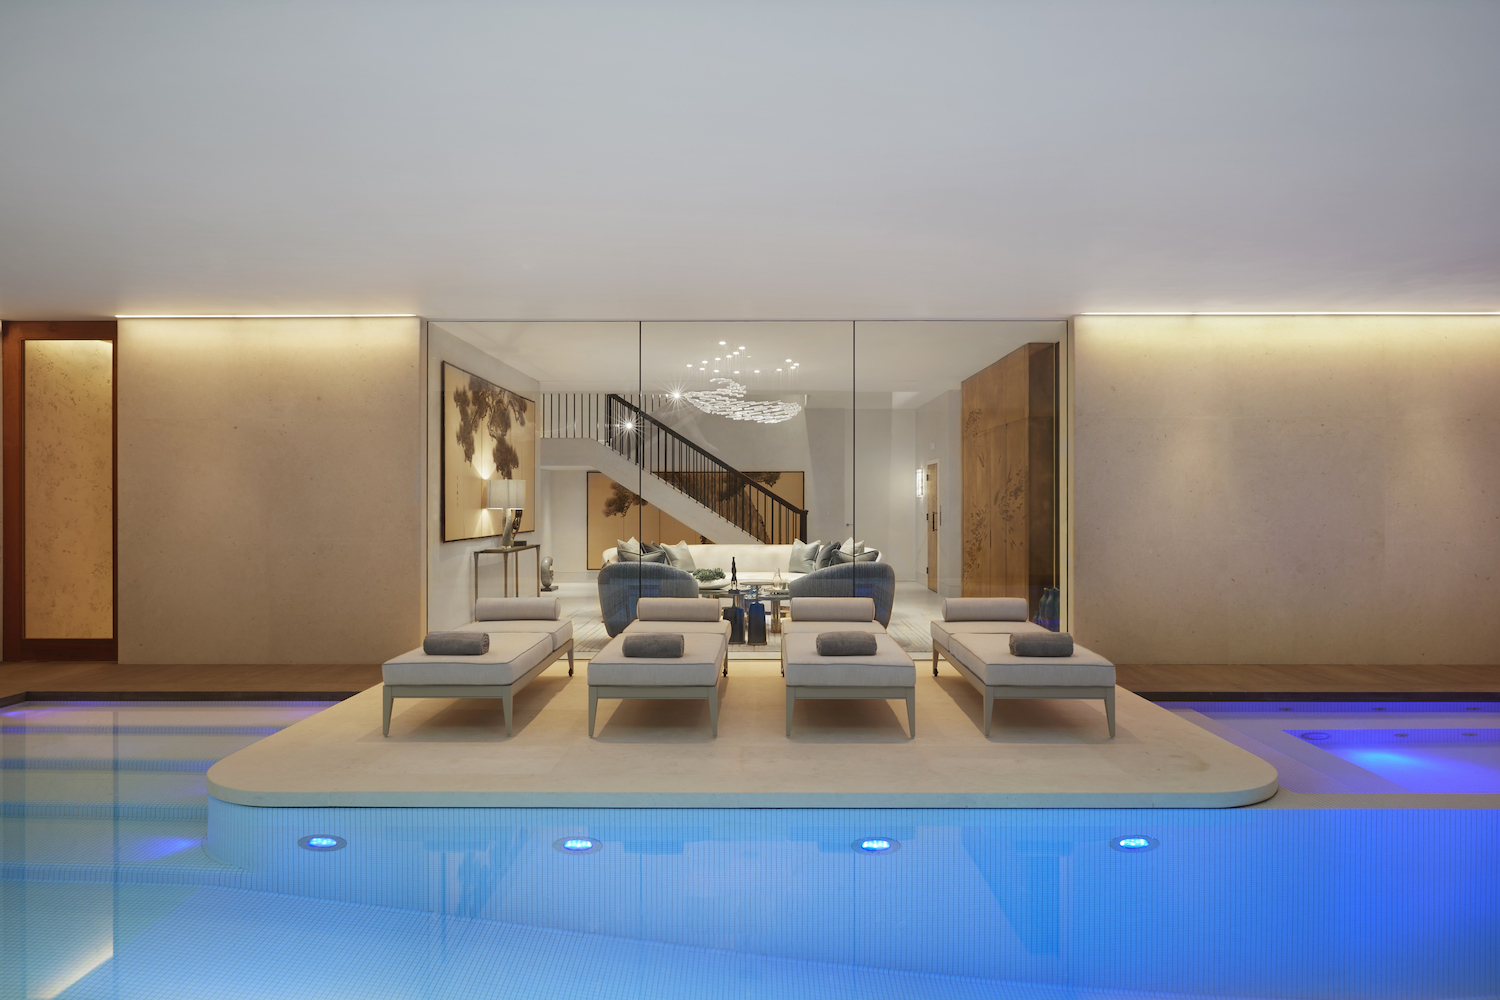 The basement spa in a Notting Hill town house interior designed by Katharine Pooley